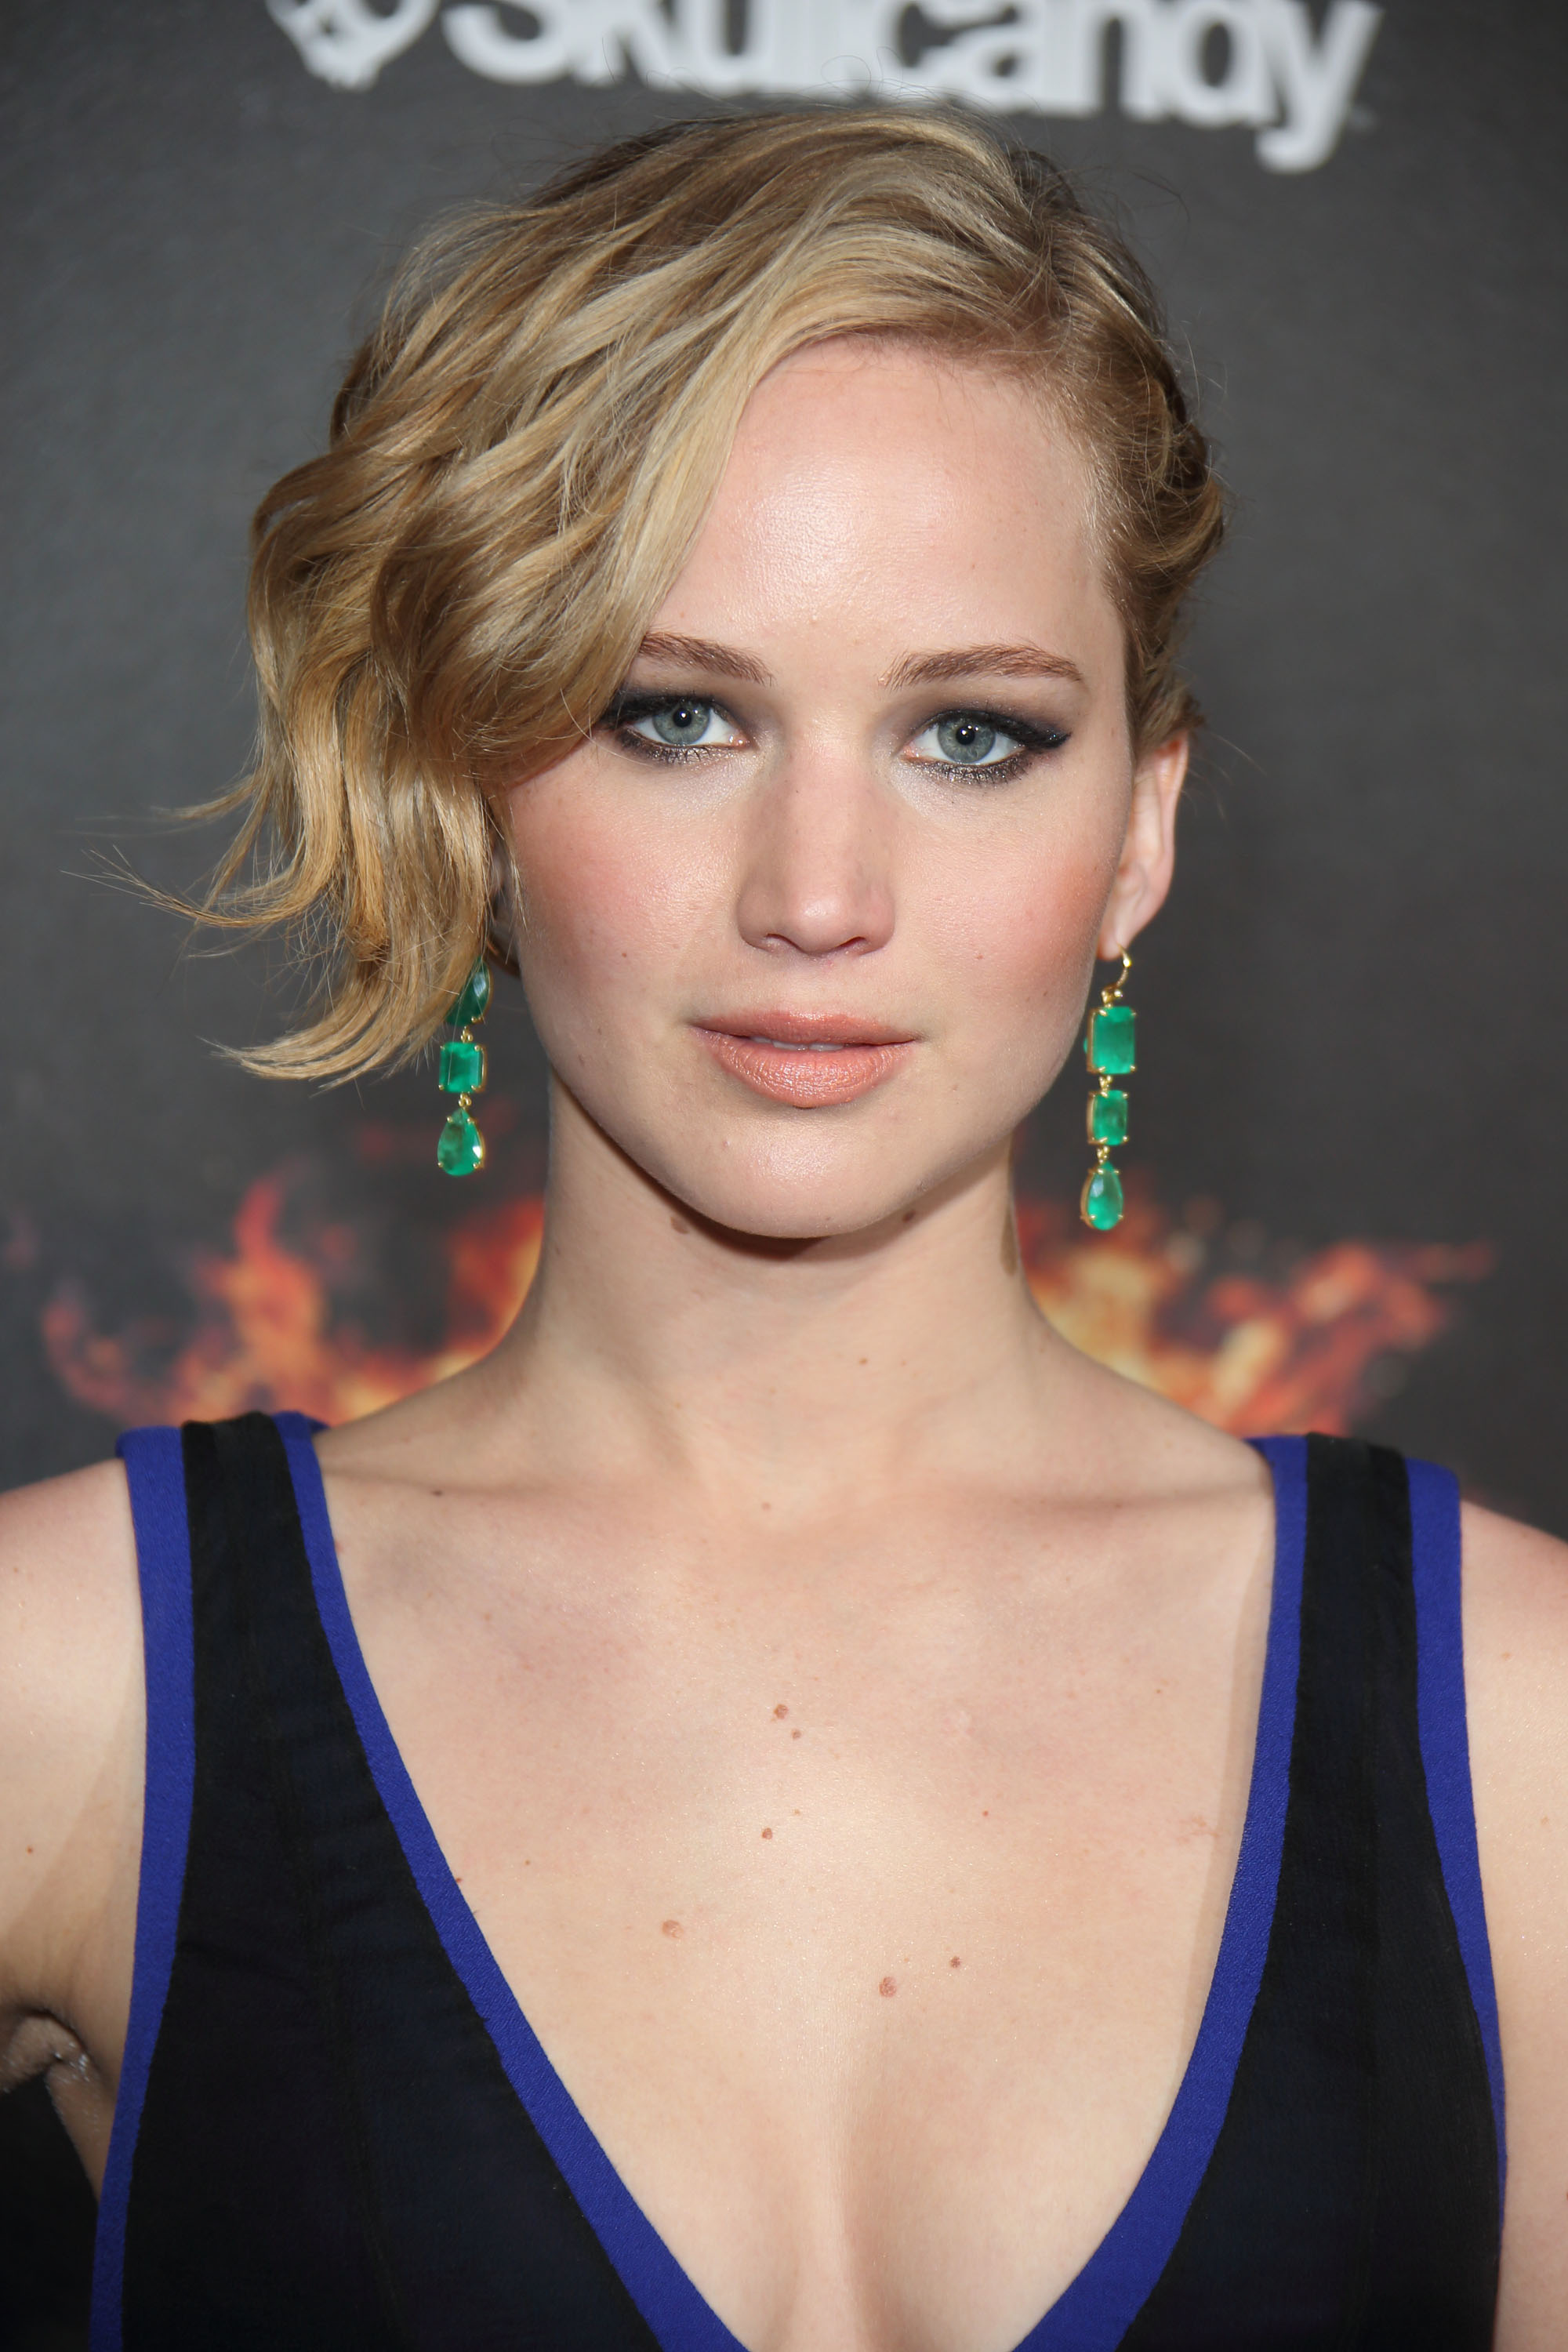 Jennifer Lawrence attends the "The Hunger Games: Mockingjay Part 1"  party  at the 67th Annual Cannes Film Festival on May 17, 2014 in Cannes, France. (Mike Marsland&mdash;WireImage)